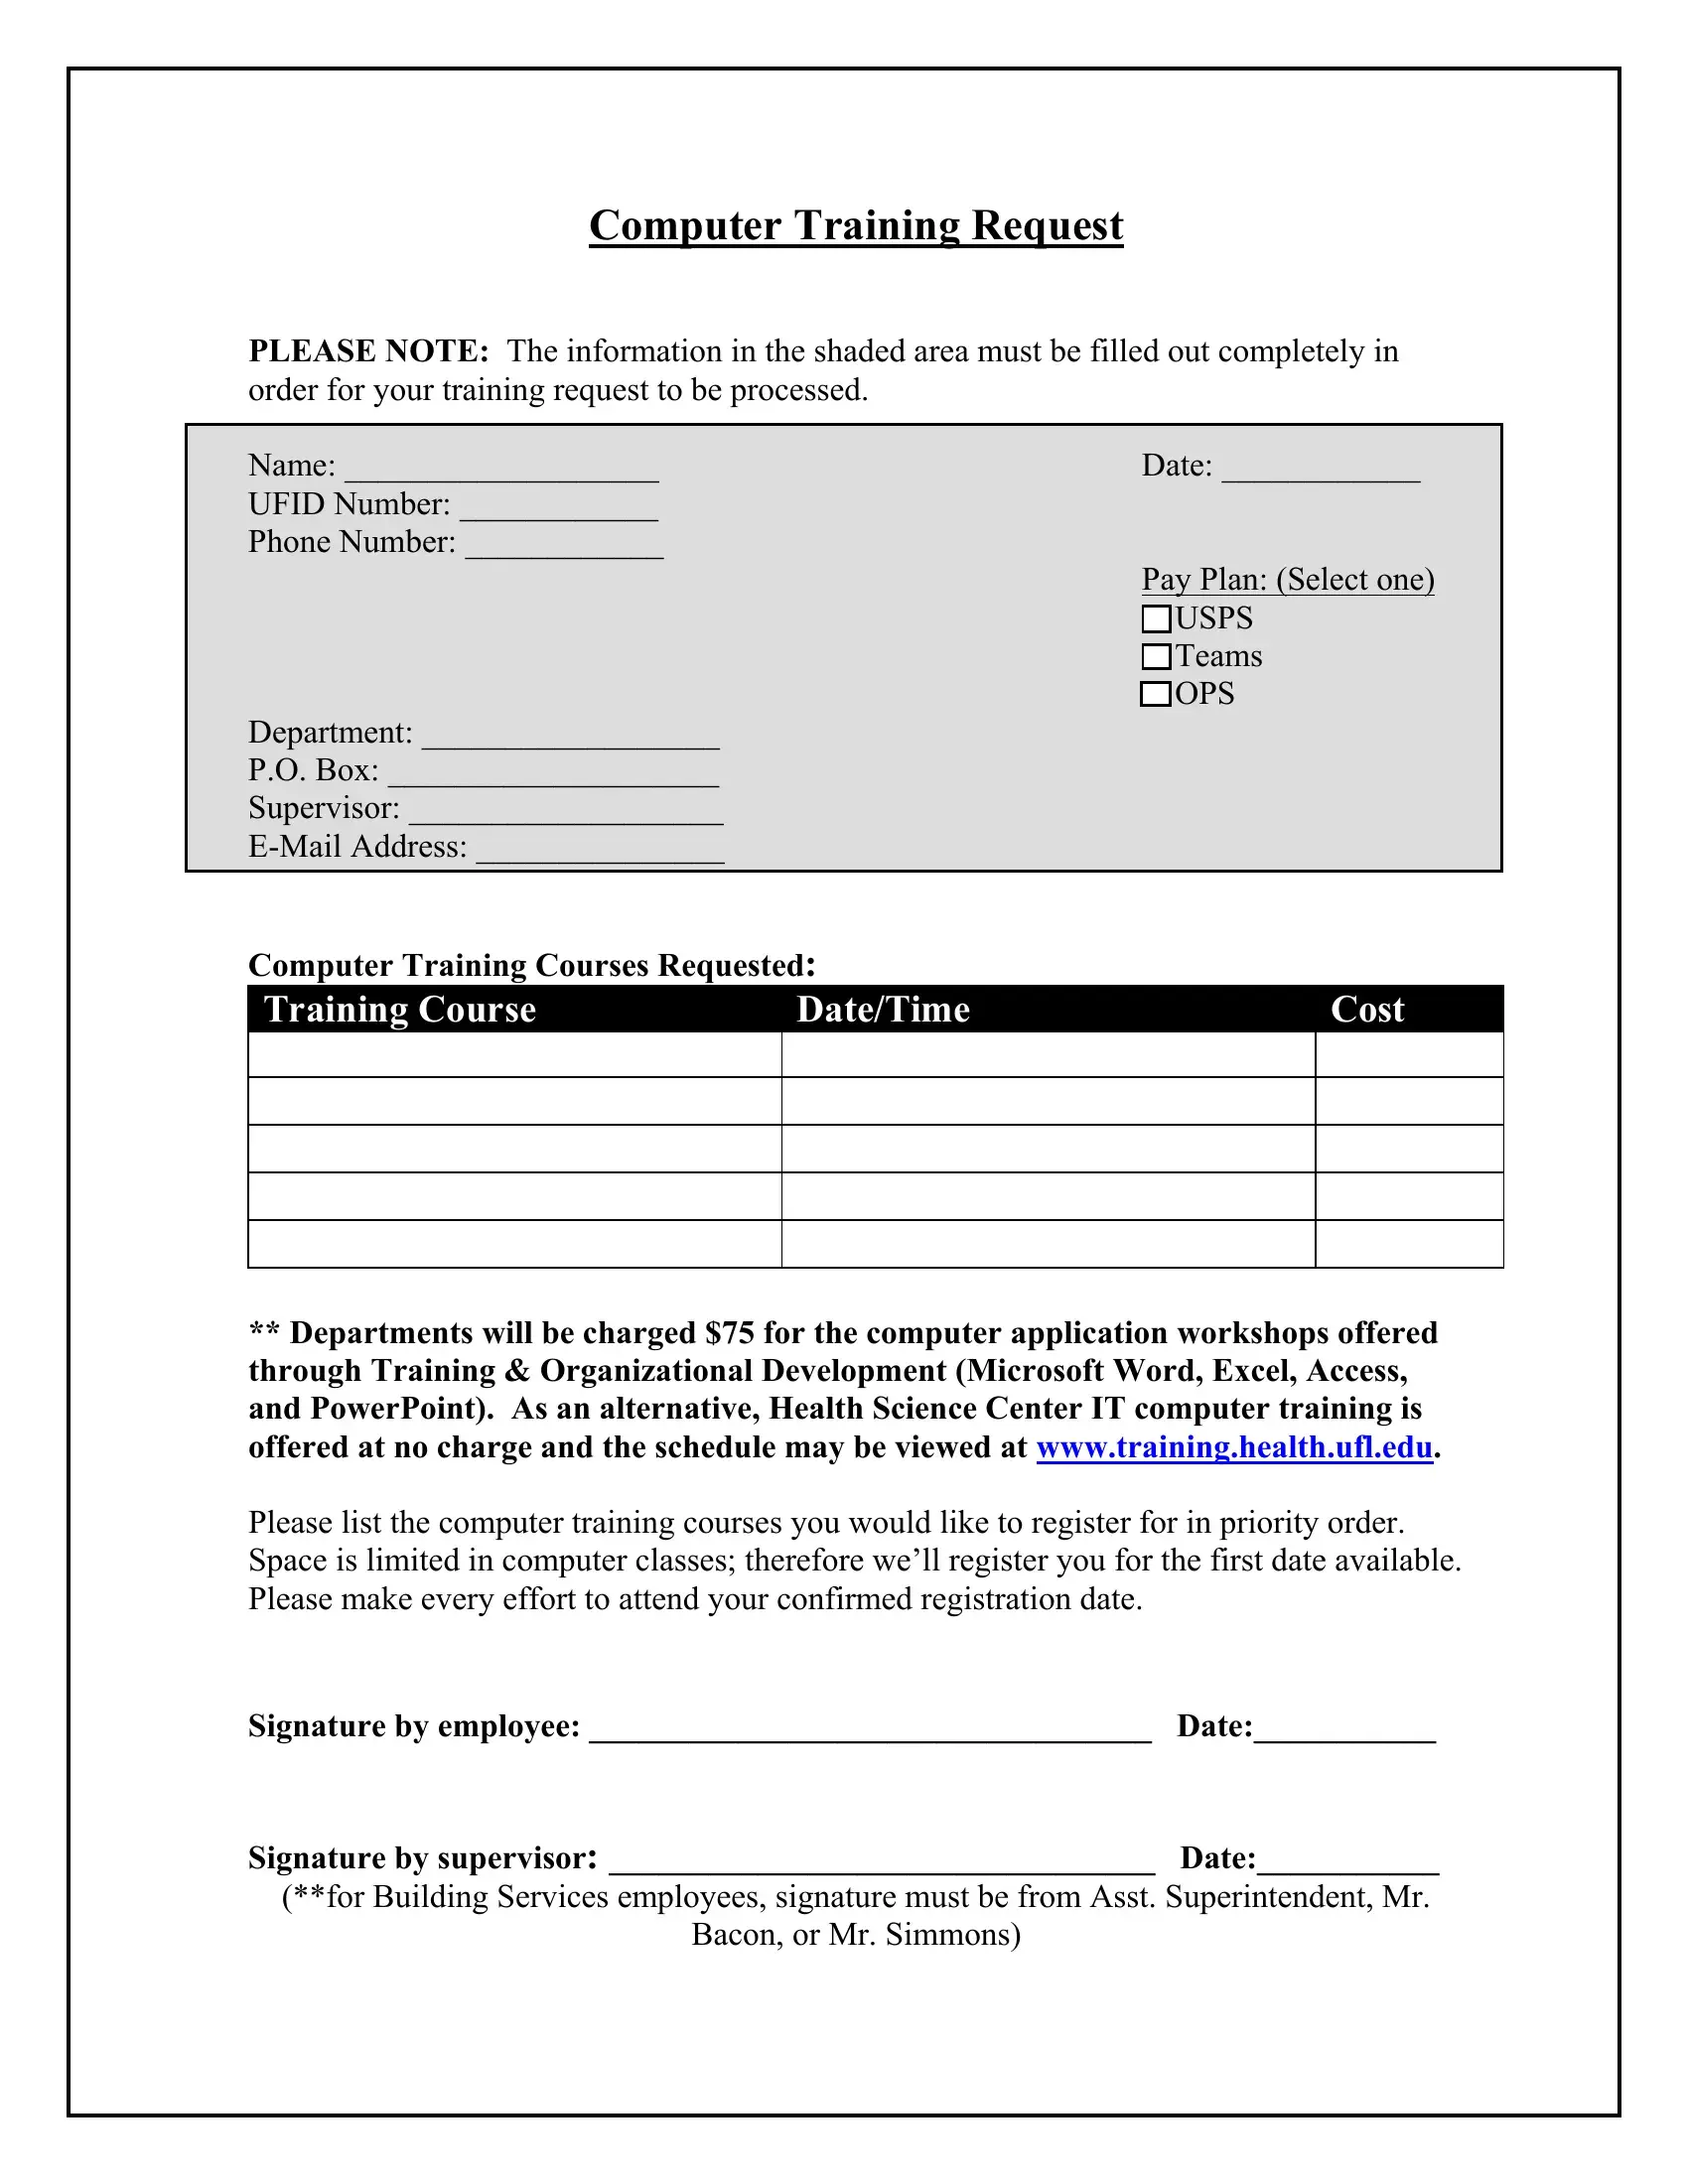 training-request-form-fill-out-printable-pdf-forms-online